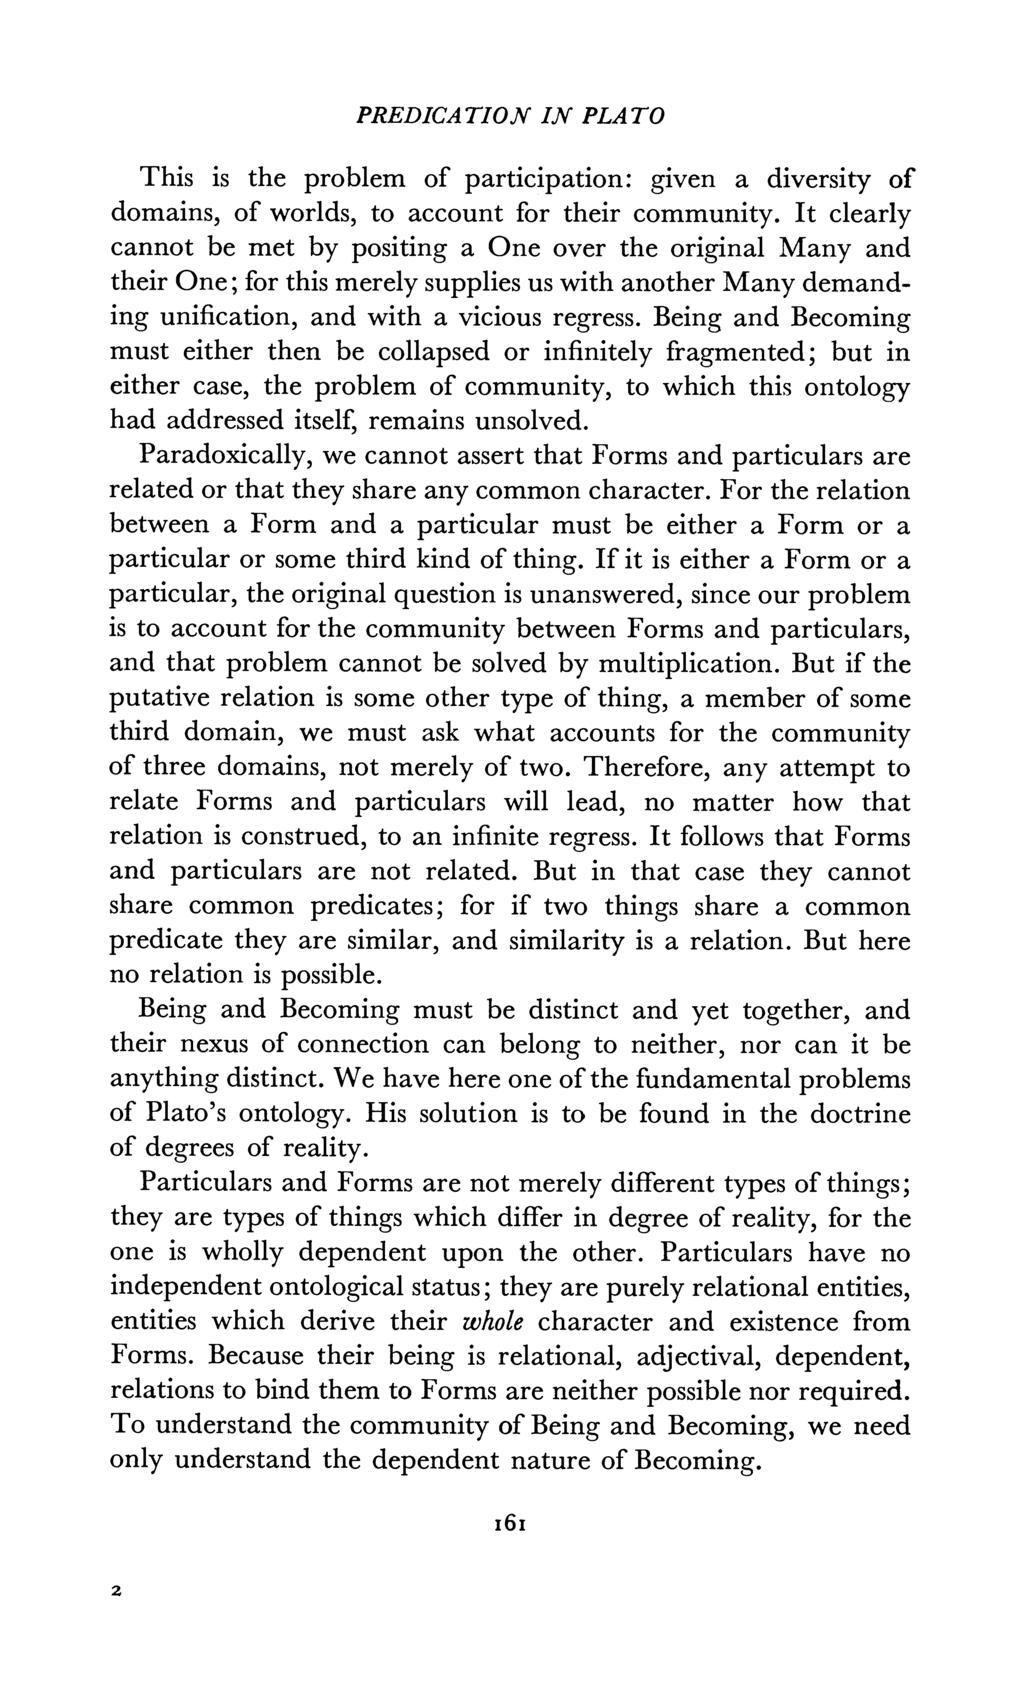 PREDICATION IN PLATO This is the problem of participation: given a diversity of domains, of worlds, to account for their community.